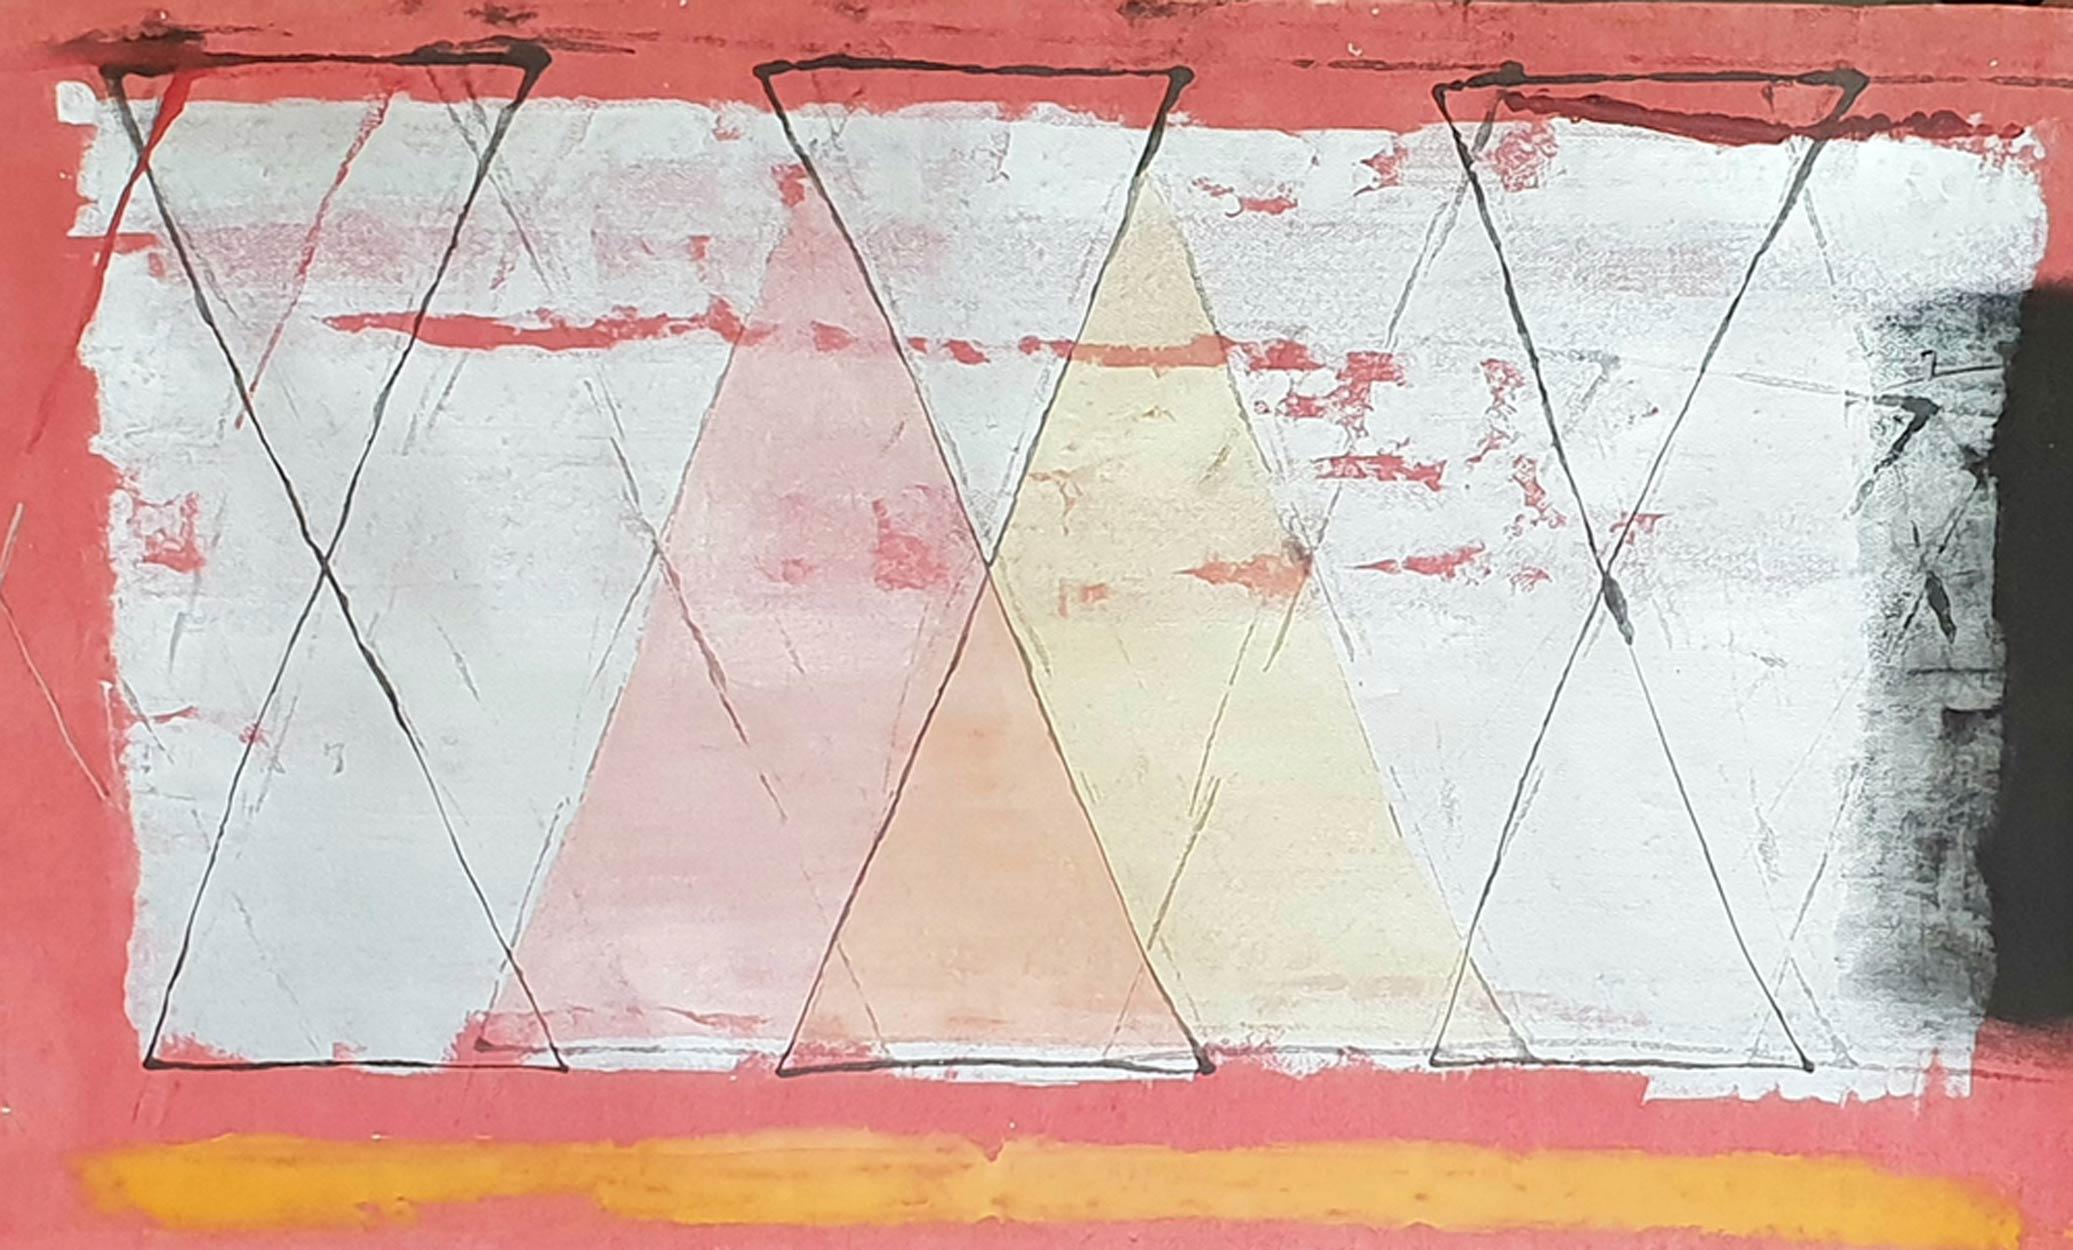 Abstract Painting, Mixed Media on paper, Red, Sliver, Yellow colors "In Stock"